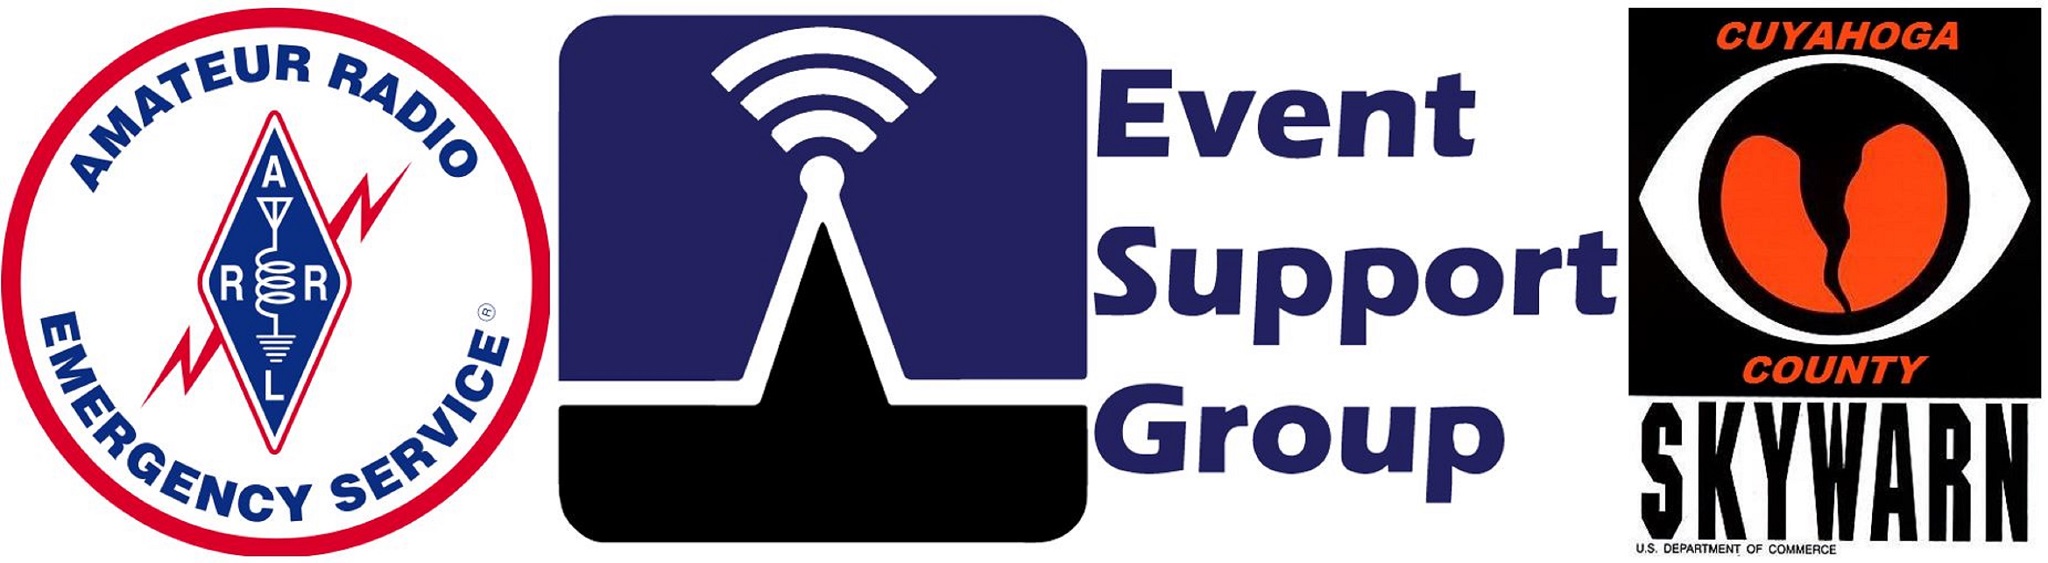 Event Support Group